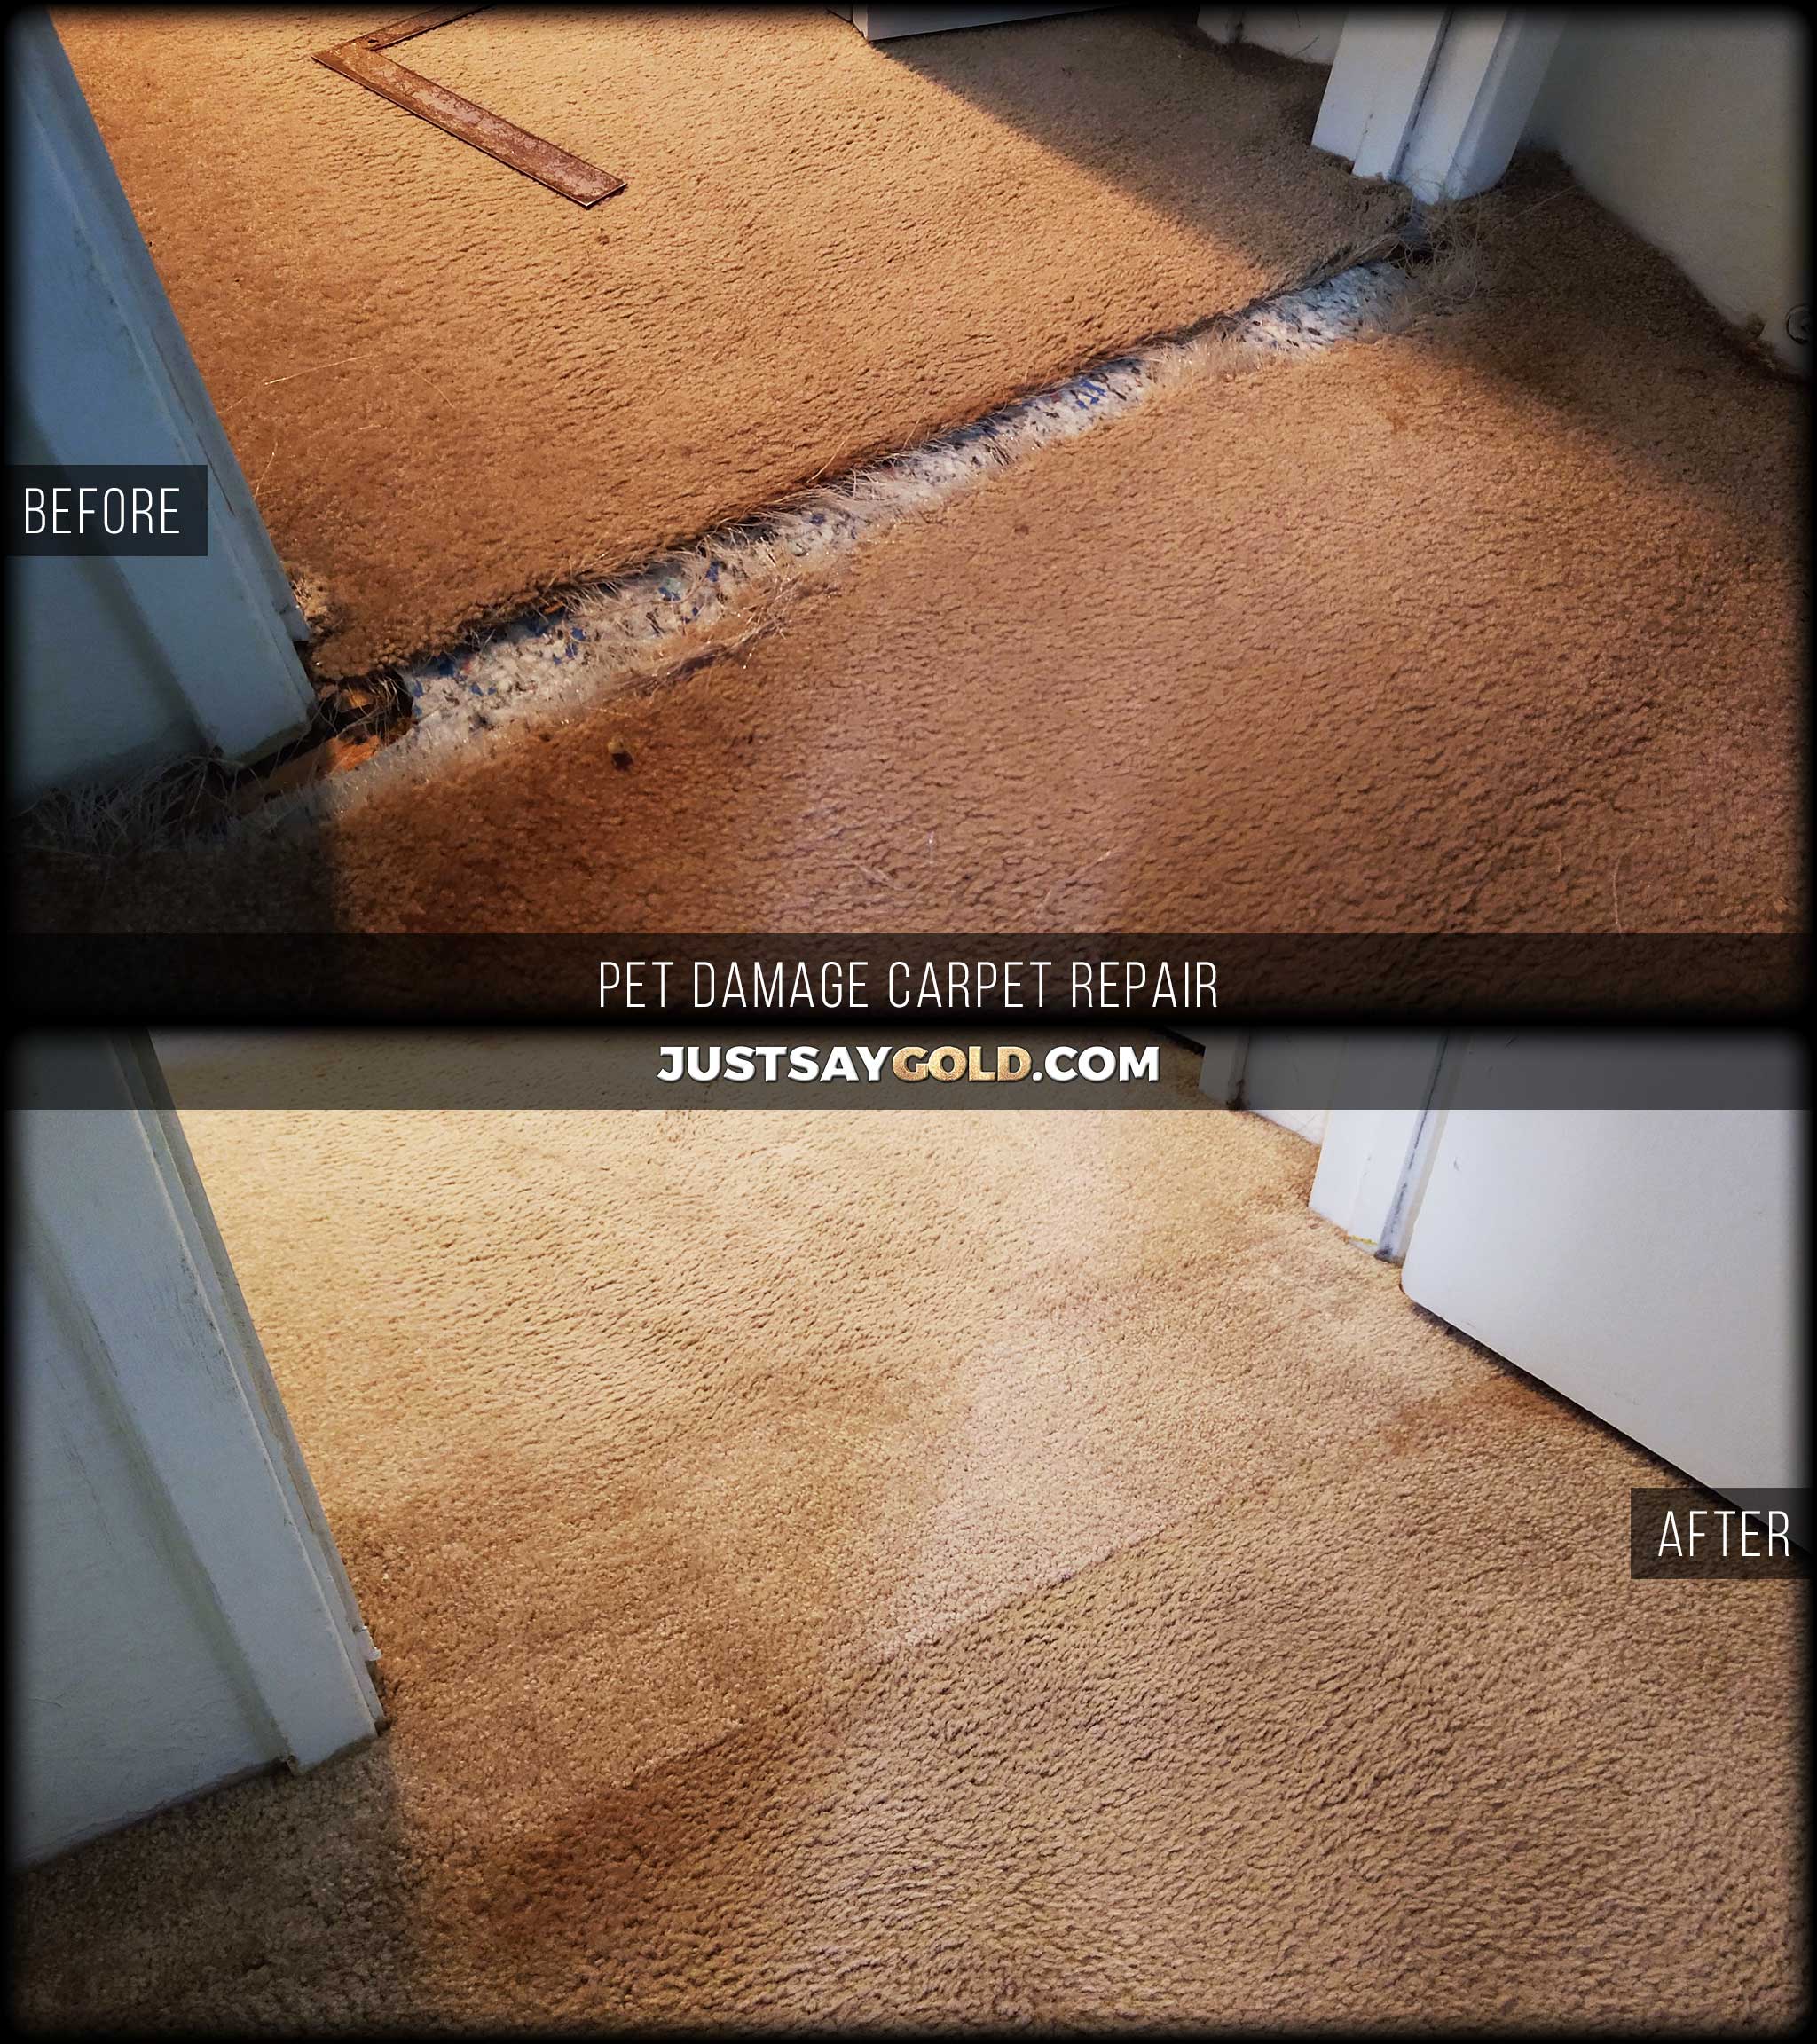 How would you go about patching this pet damaged carpet? I do have